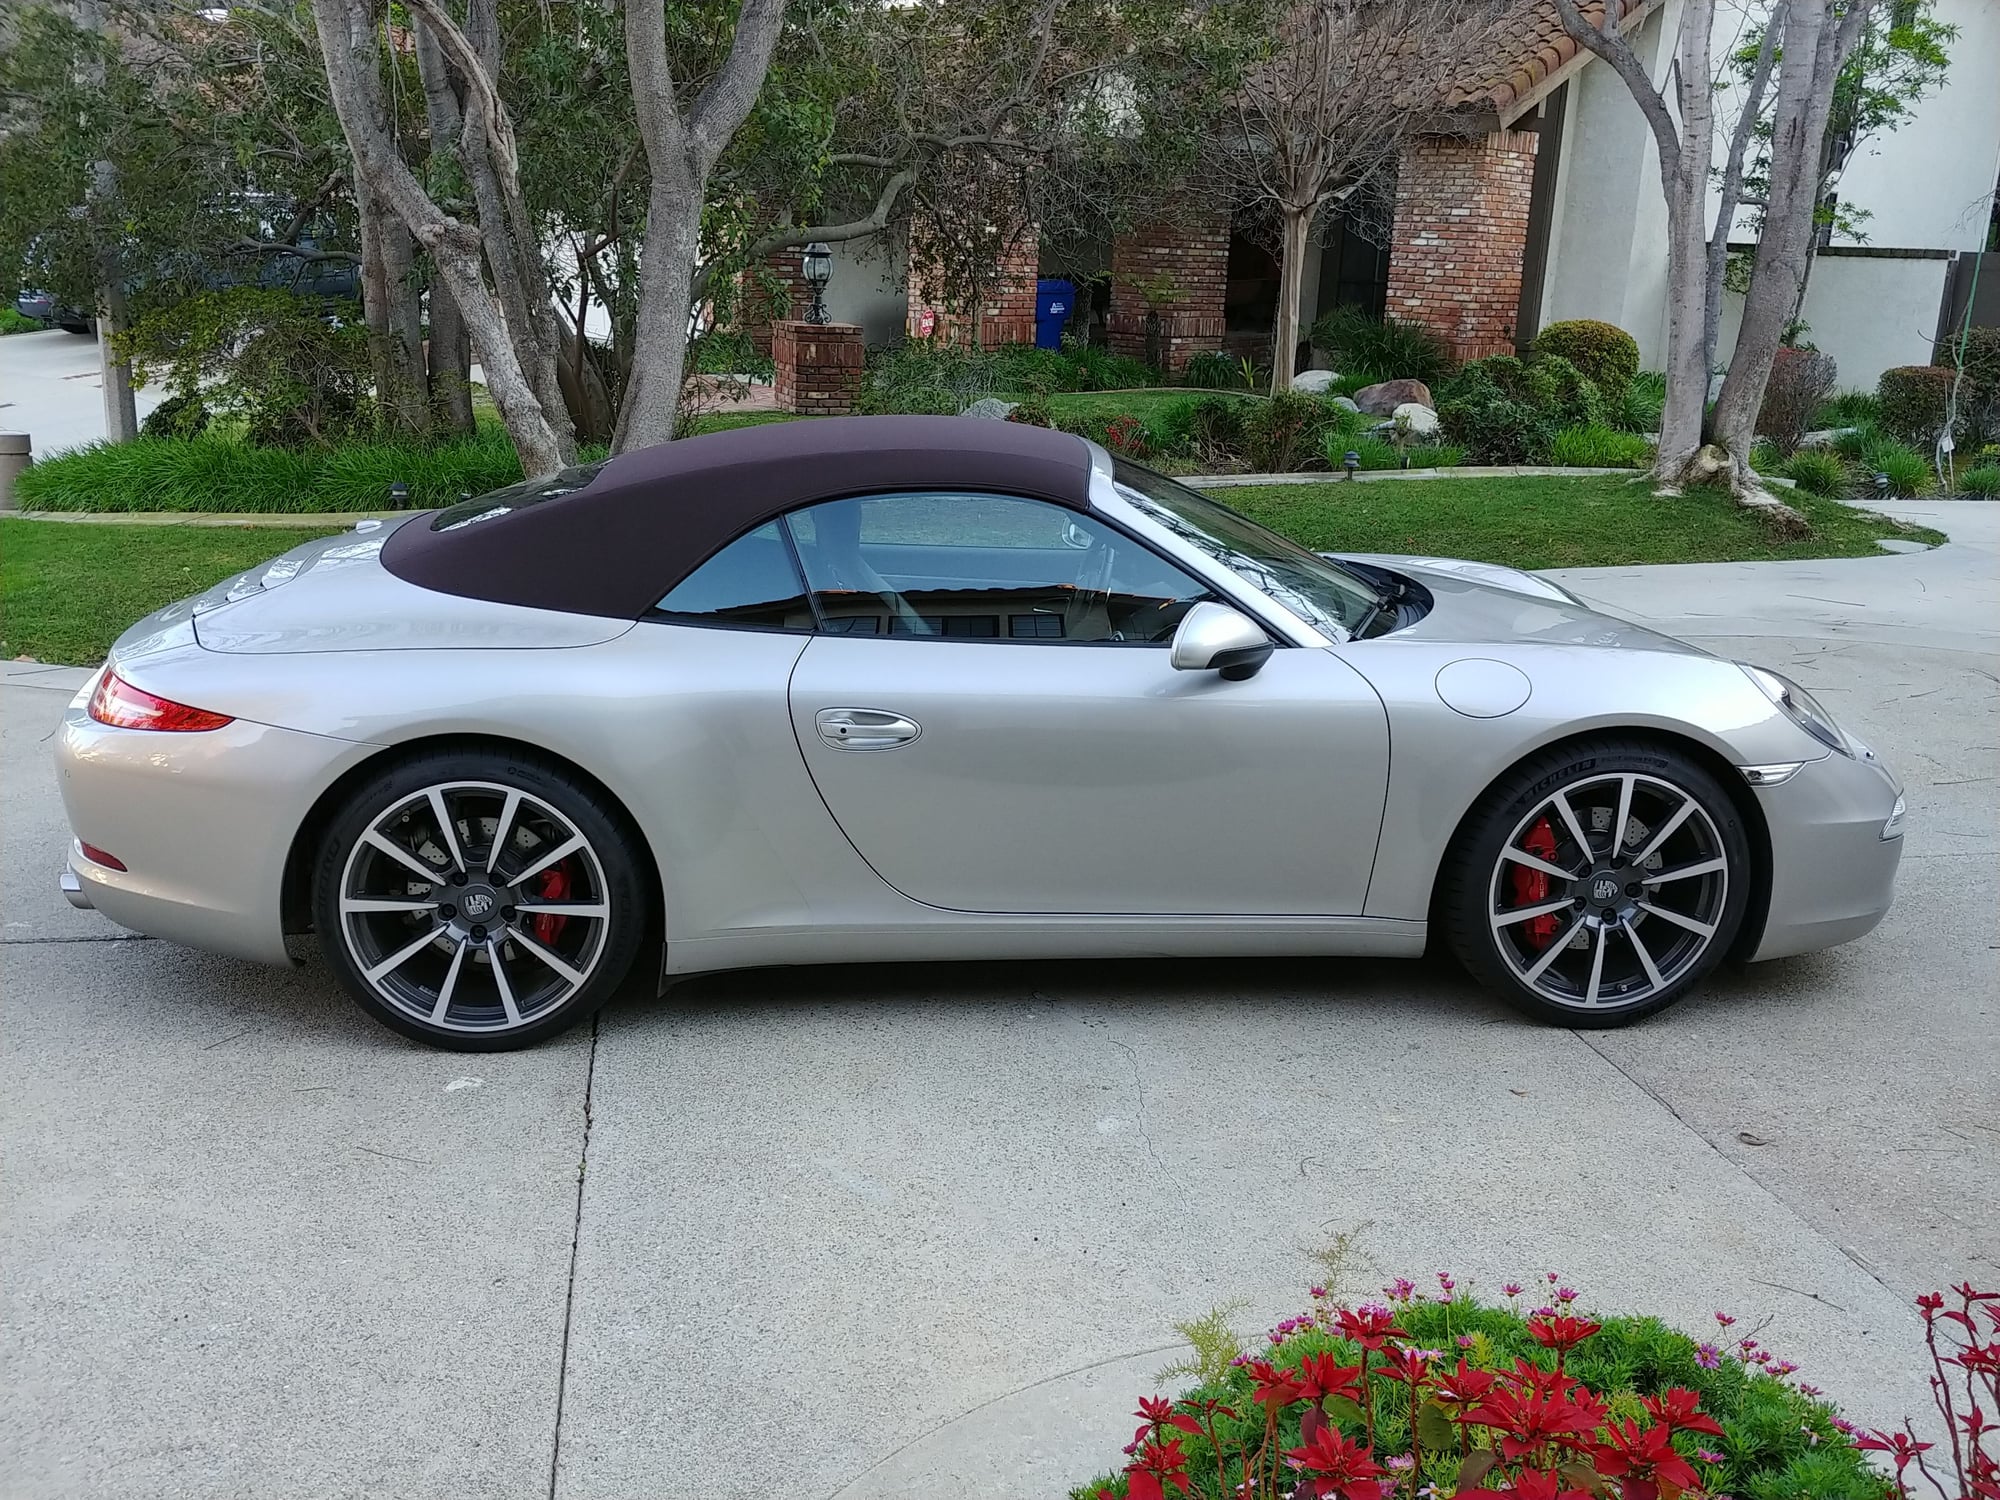 2012 Porsche 911 - 2012 Carrera S Cab Loaded - Used - VIN WP0CB2A90CS155091 - 23,000 Miles - 6 cyl - 2WD - Automatic - Convertible - Silver - Rowland Heights, CA 91748, United States